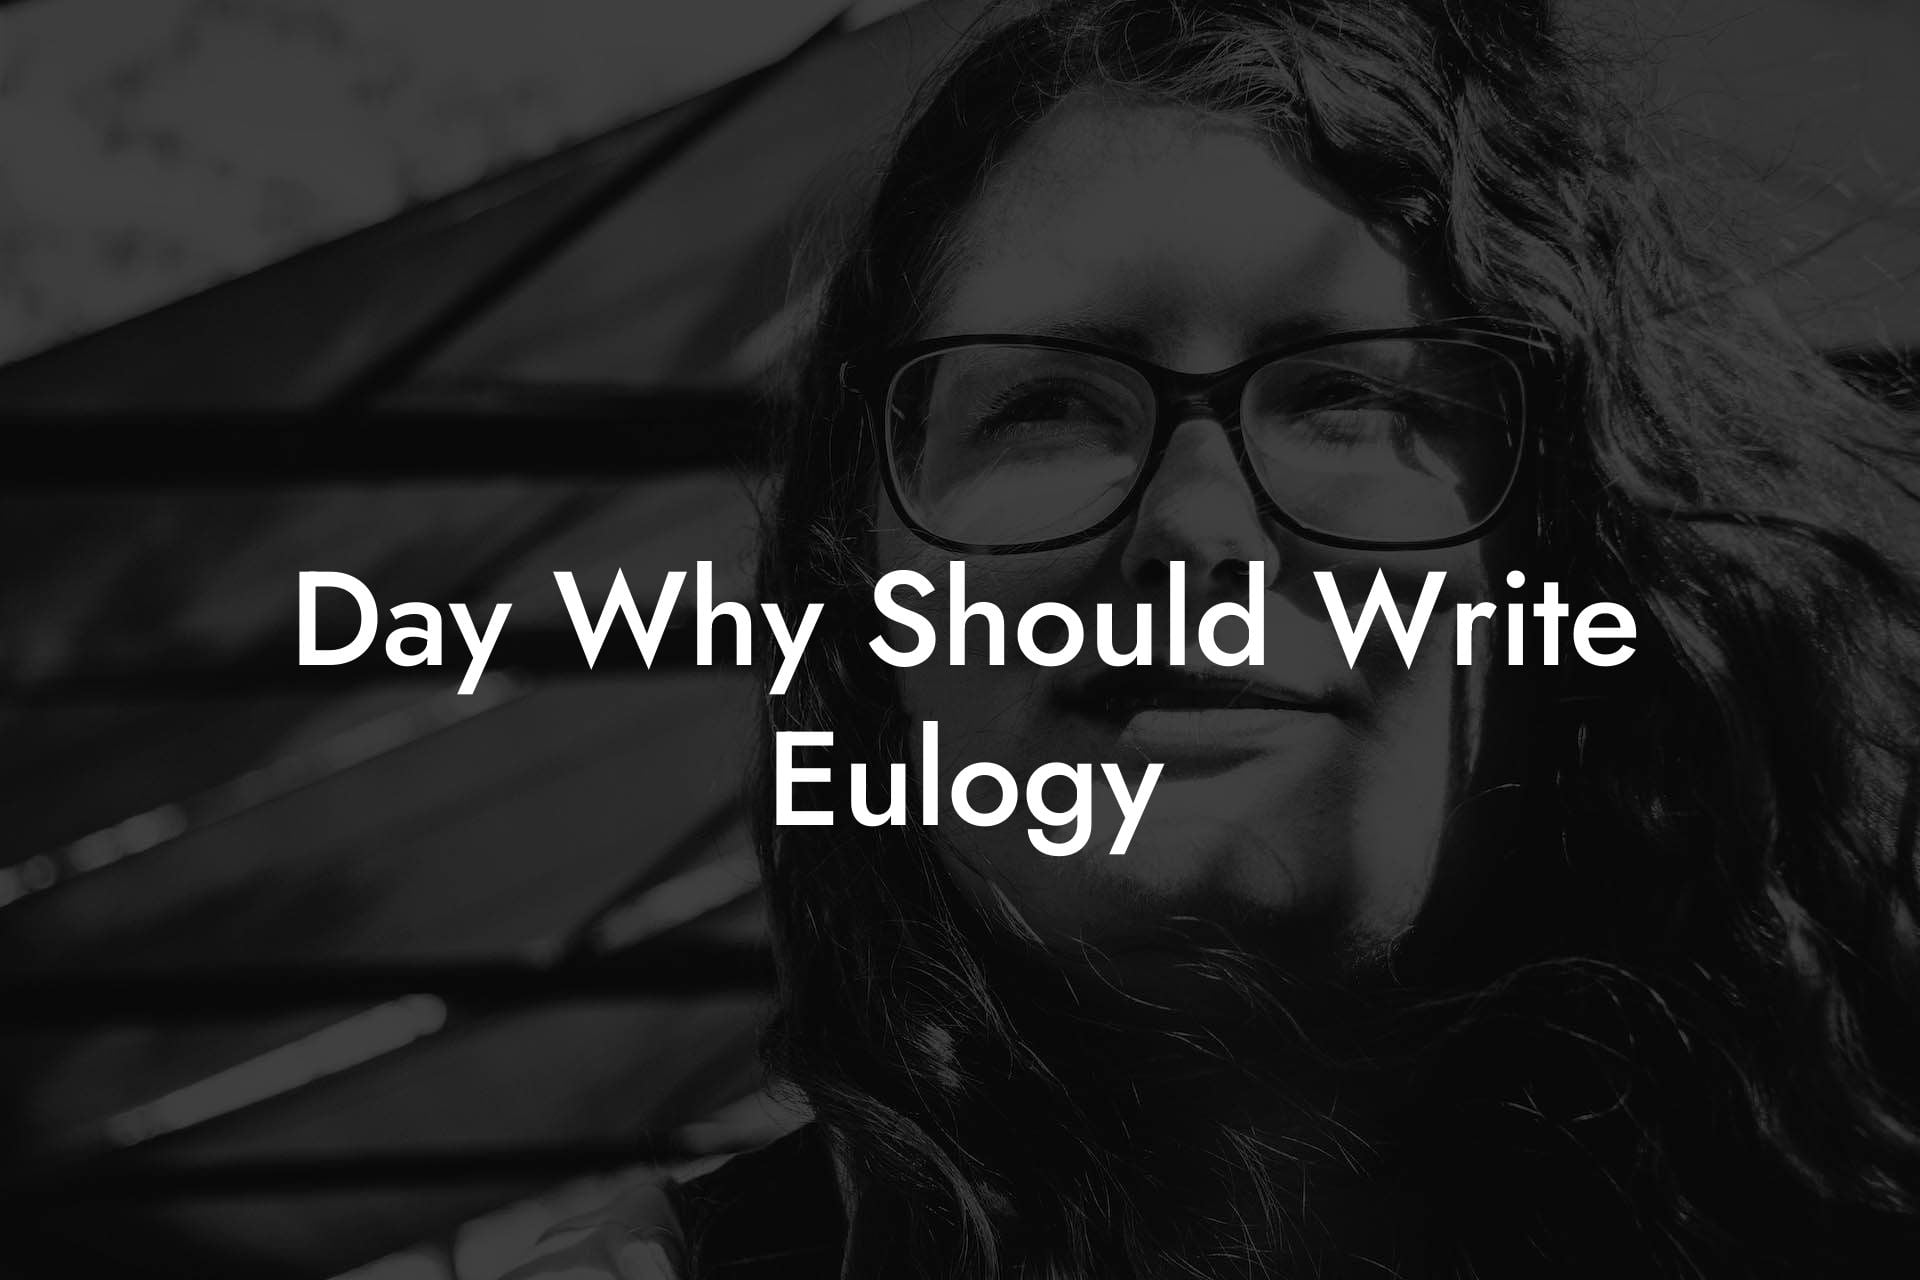 Day Why Should Write Eulogy